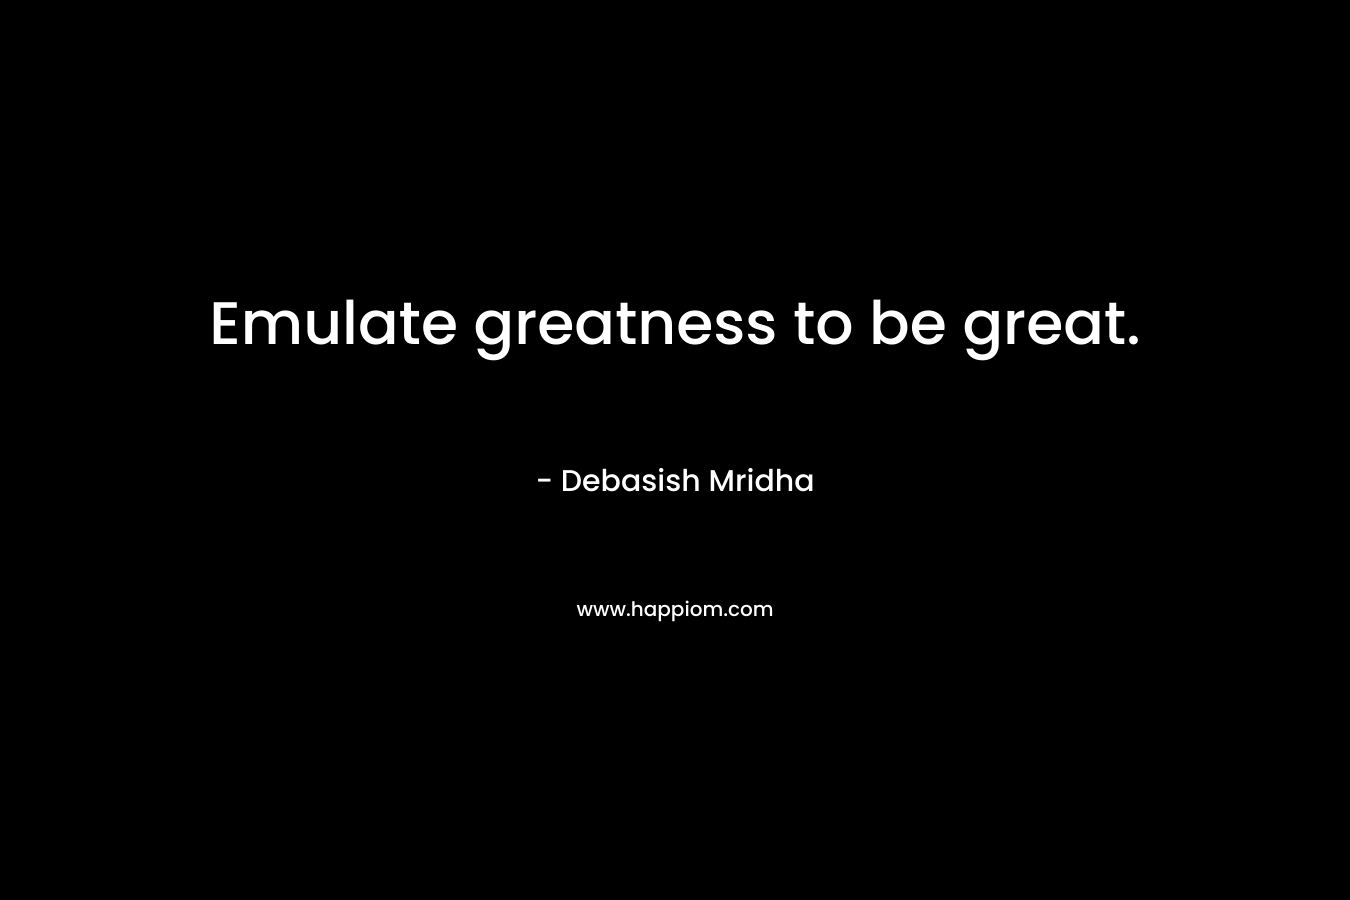 Emulate greatness to be great.